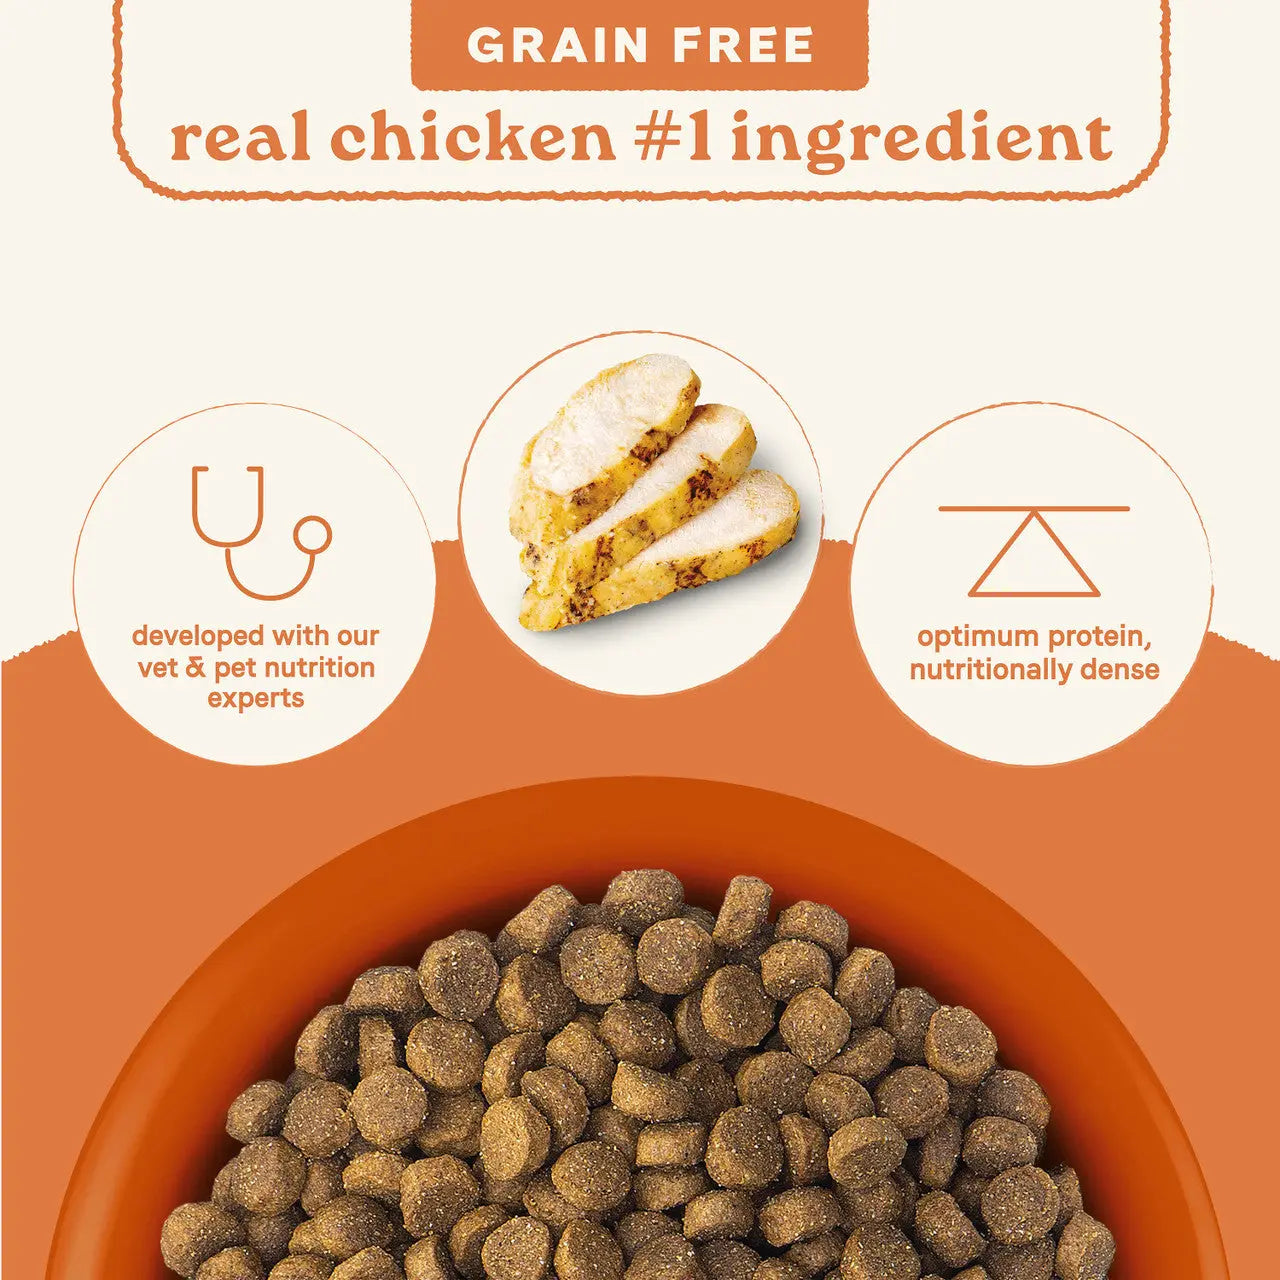 All Life Stages Dry Dog Food, Real Chicken & Potato Recipe CANIDAE